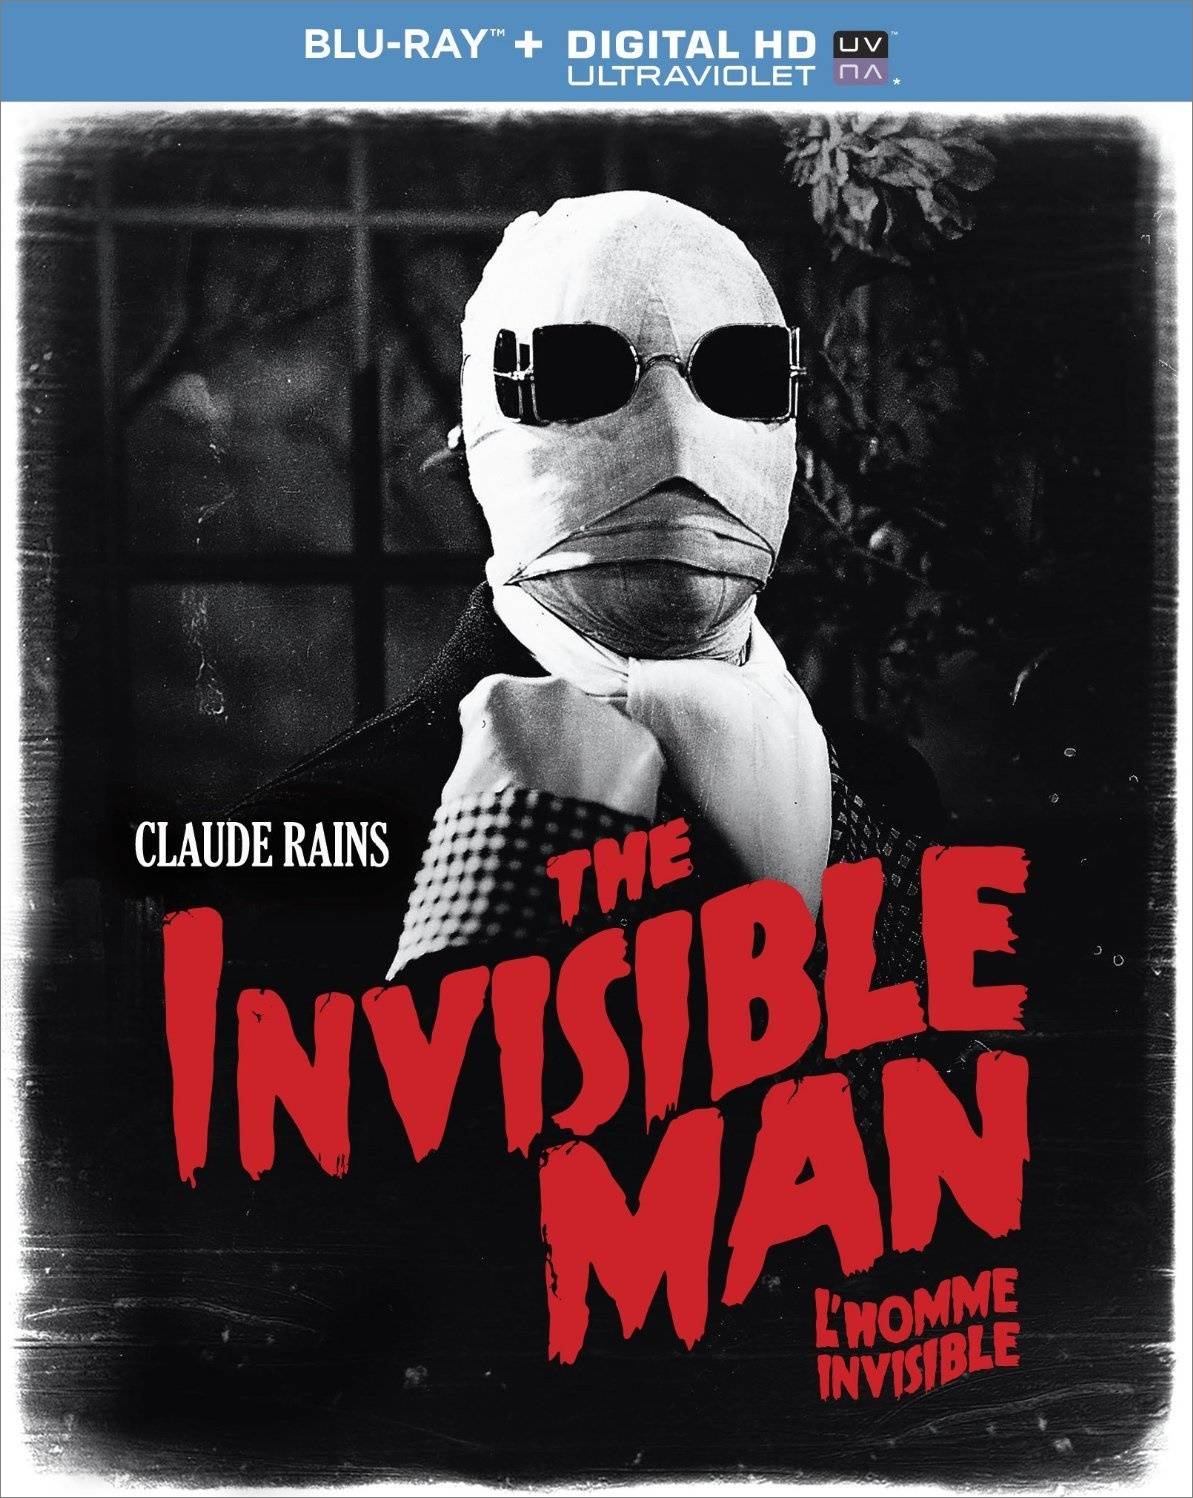 The Invisible Man (1933) + Extras [w/Commentary]